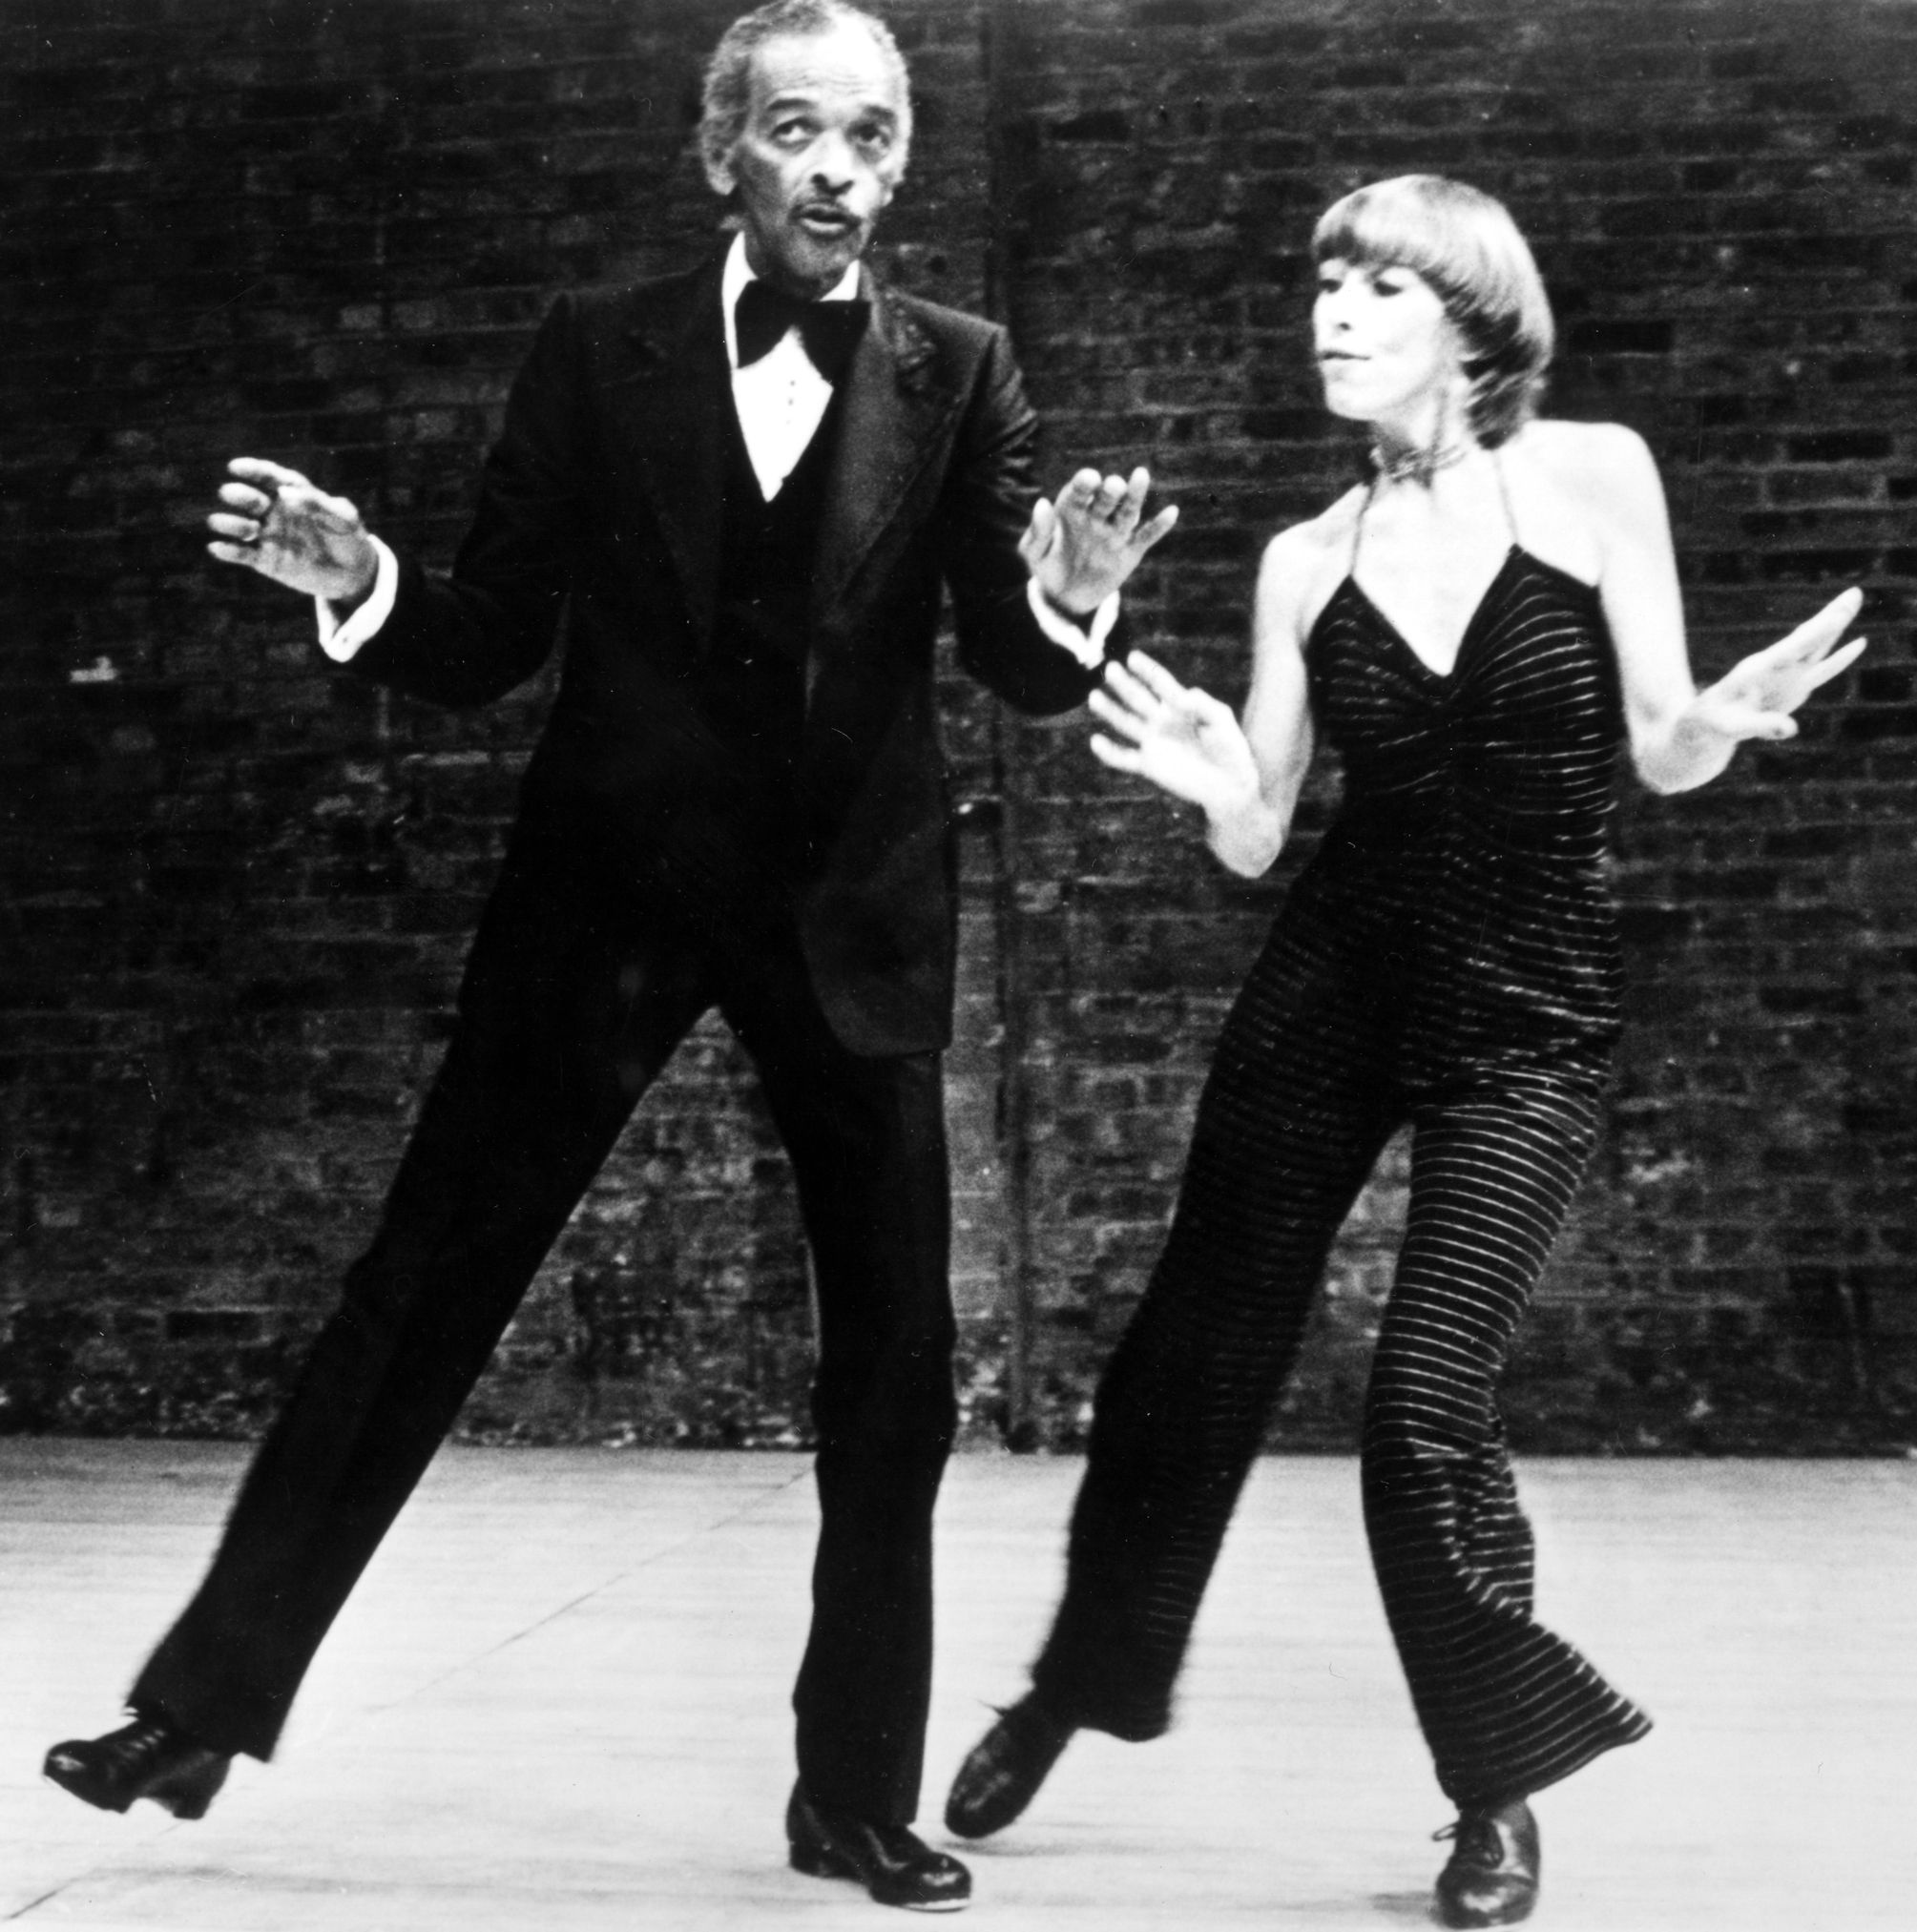 Tap Dance: Charles "Honi" Coles with Brenda Bufalino, American Tap Dance Foundation, Step by step. 2010x2030 HD Wallpaper.